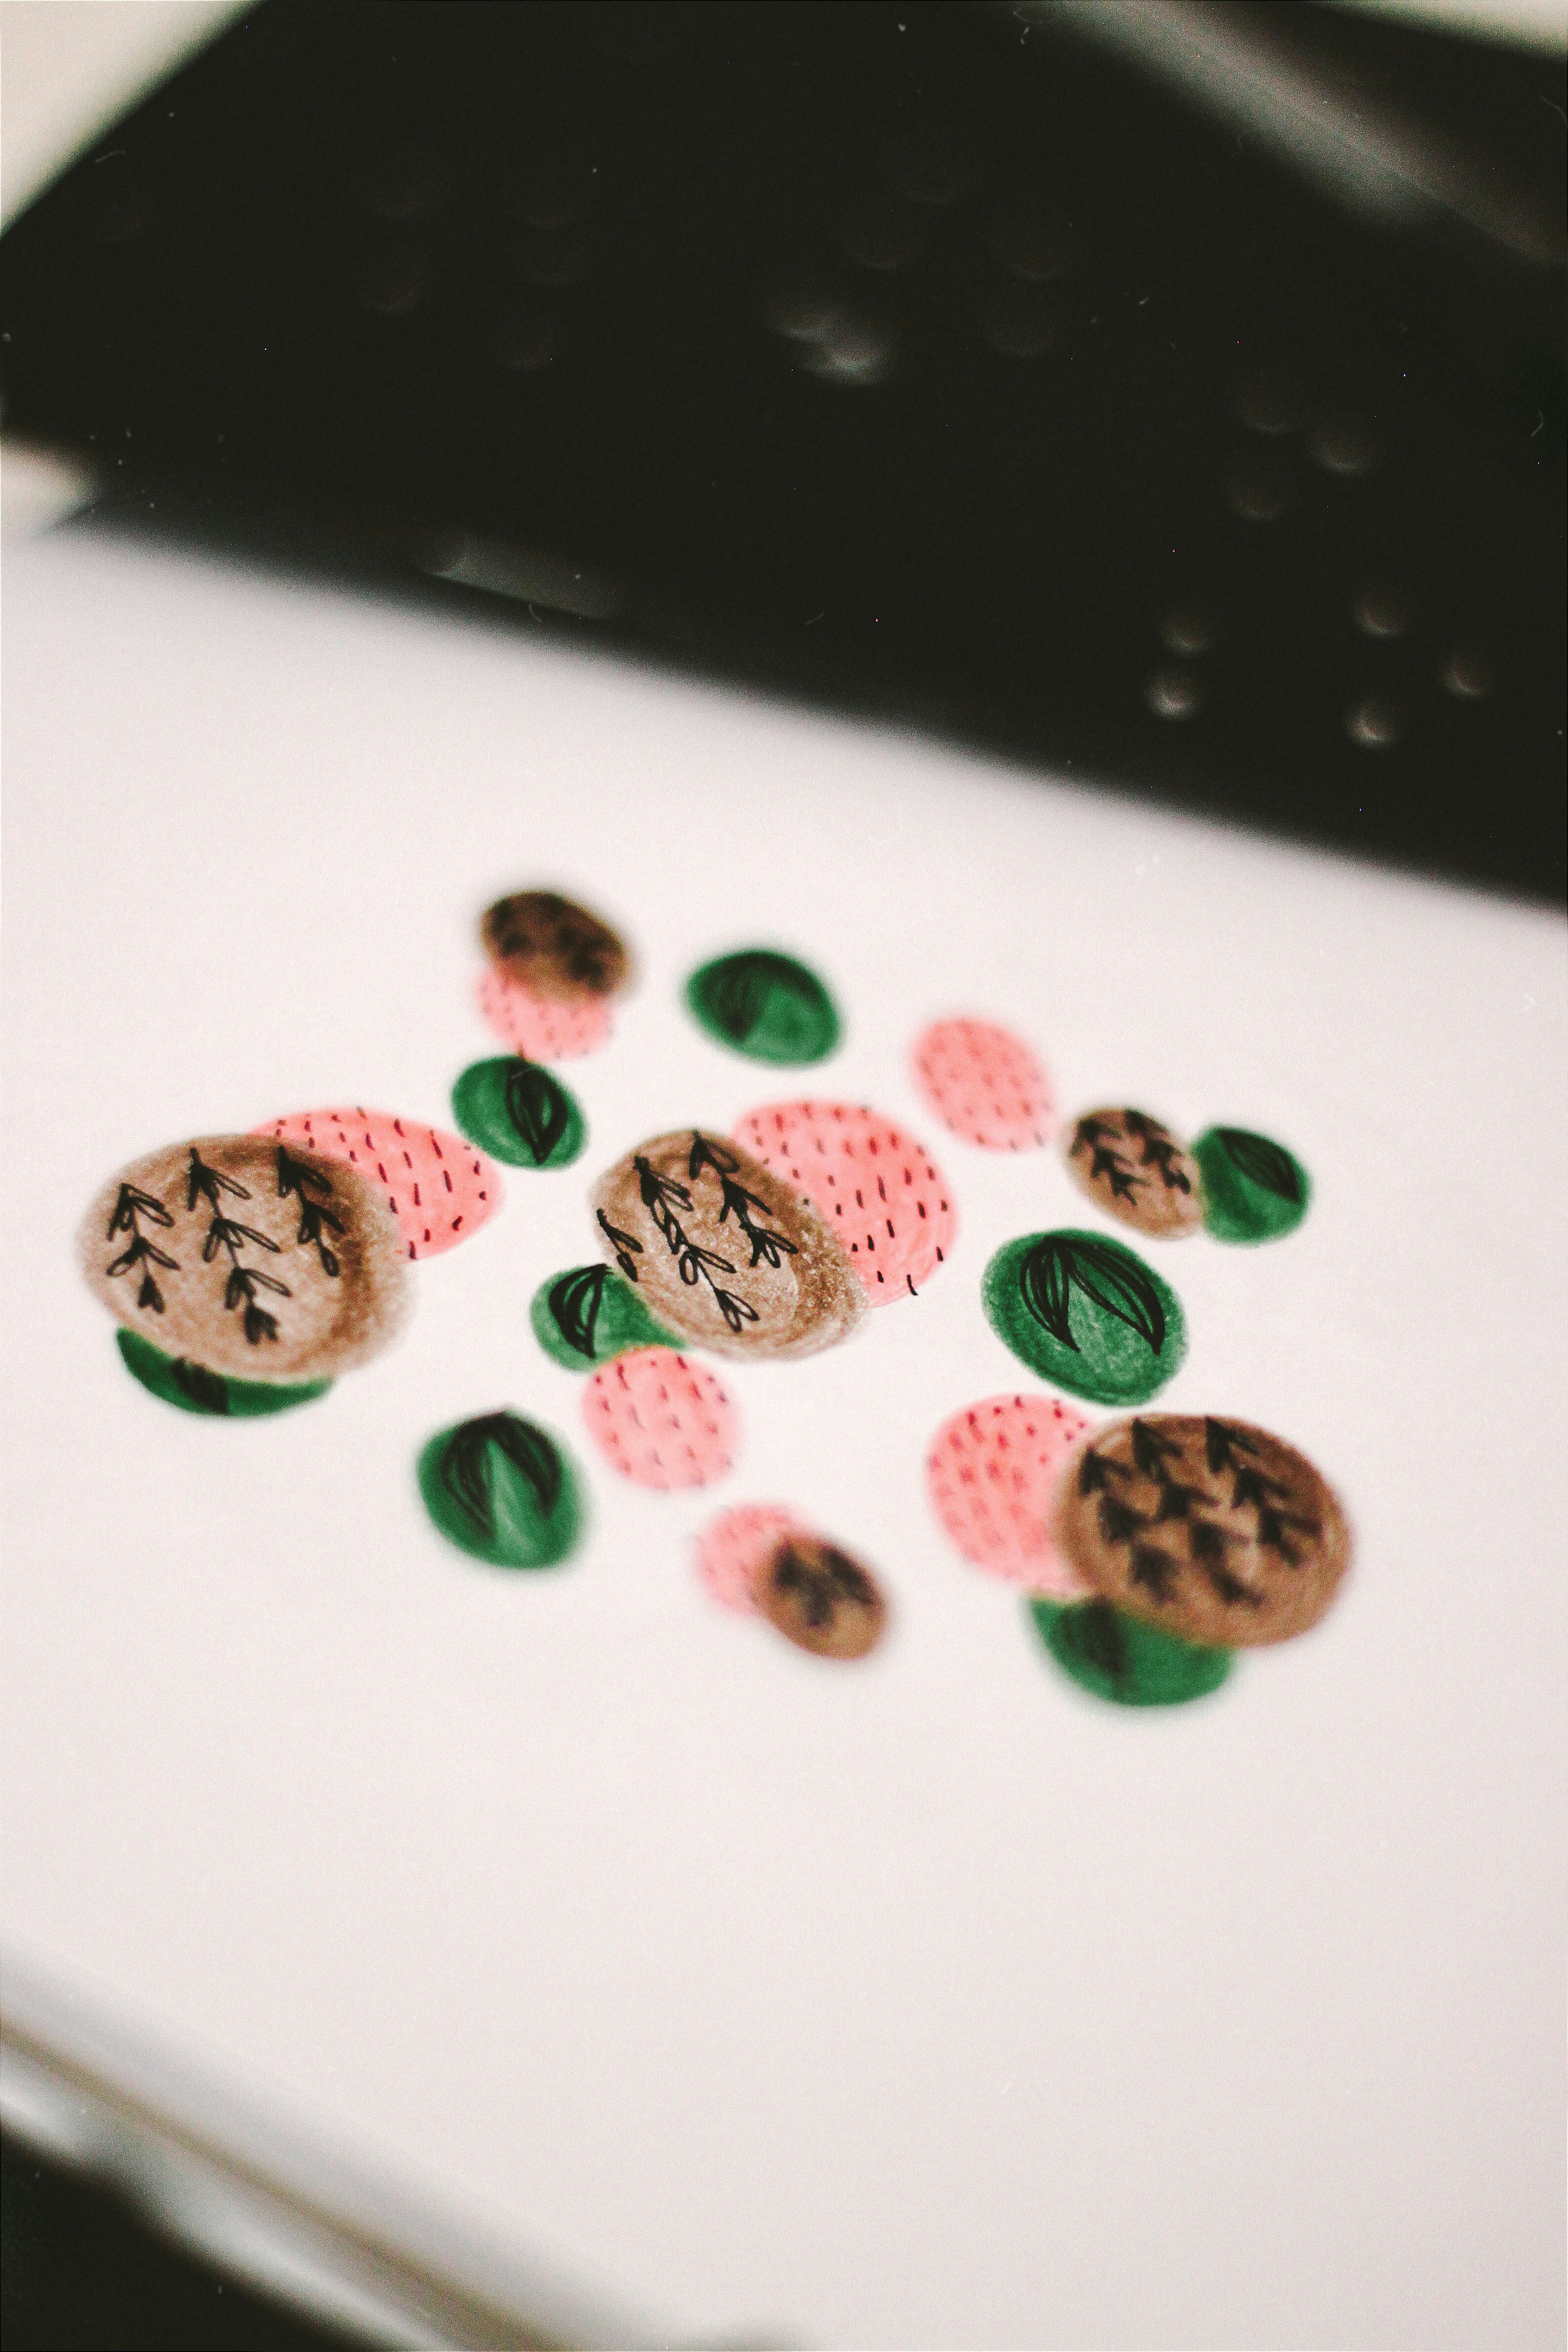 brown green and red round cookies